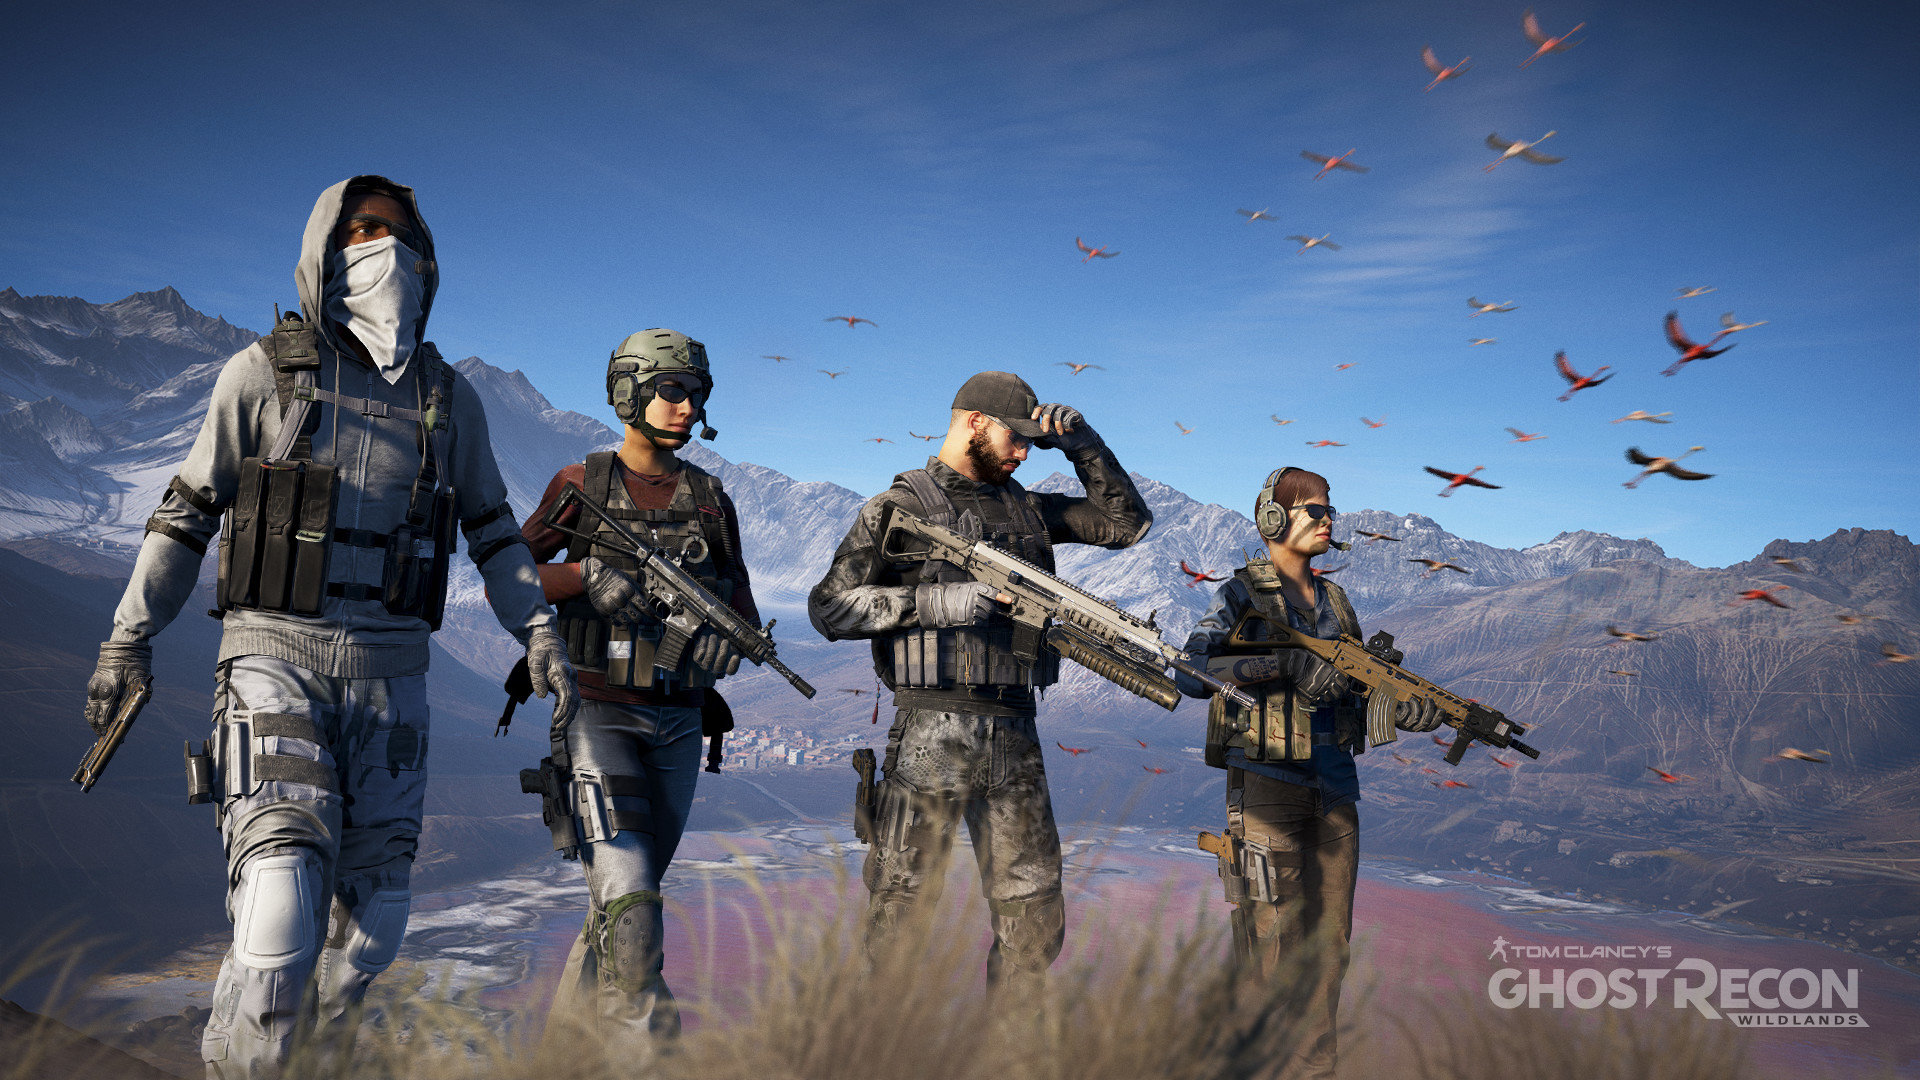 Download full hd 1080p Tom Clancy's Ghost Recon Wildlands desktop background ID:62451 for free